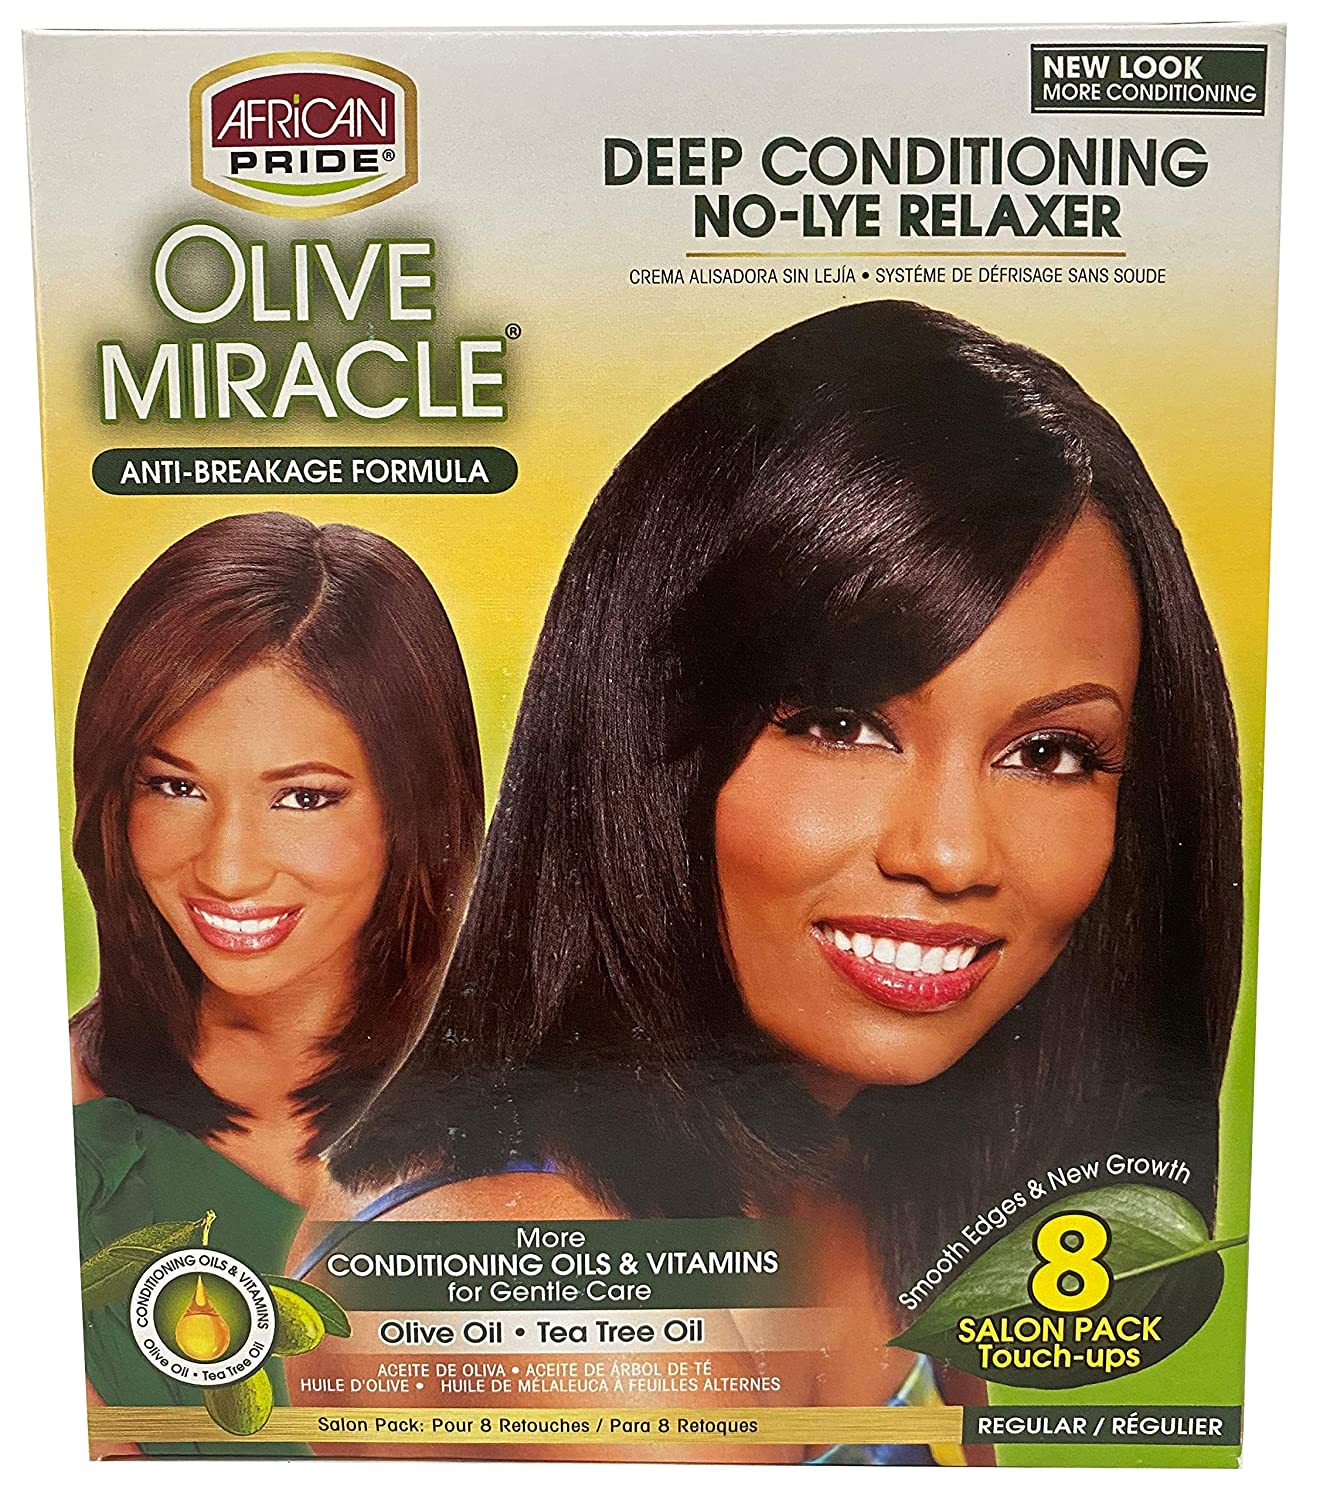 African Pride Olive Miracle Deep Conditioning No-Lye Relaxer - Regular Kit 8-Count